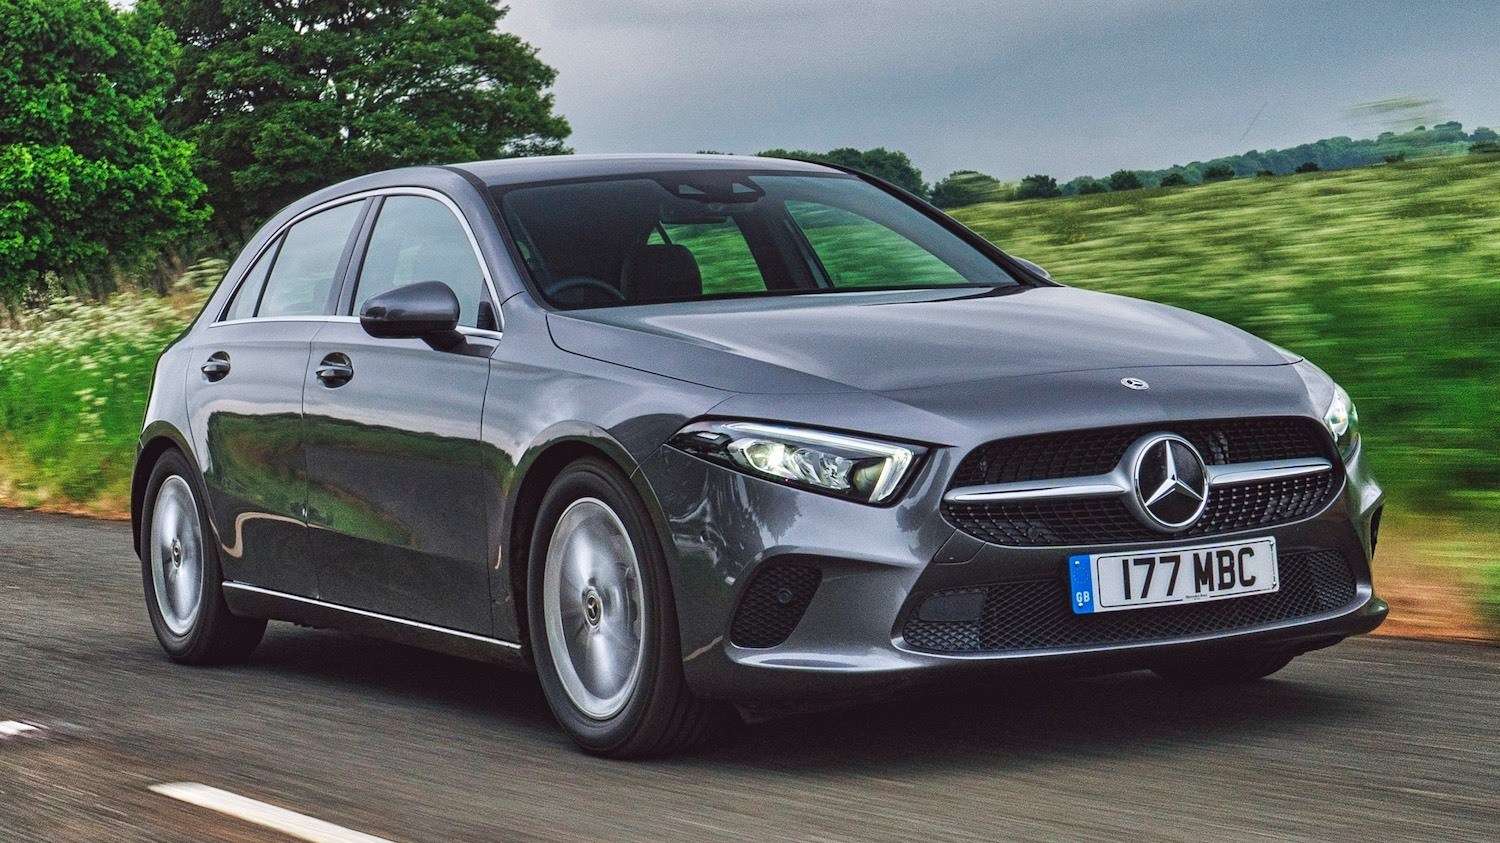 Tim Barnes-Clay reviews the New Mercedes-Benz A-Class 1